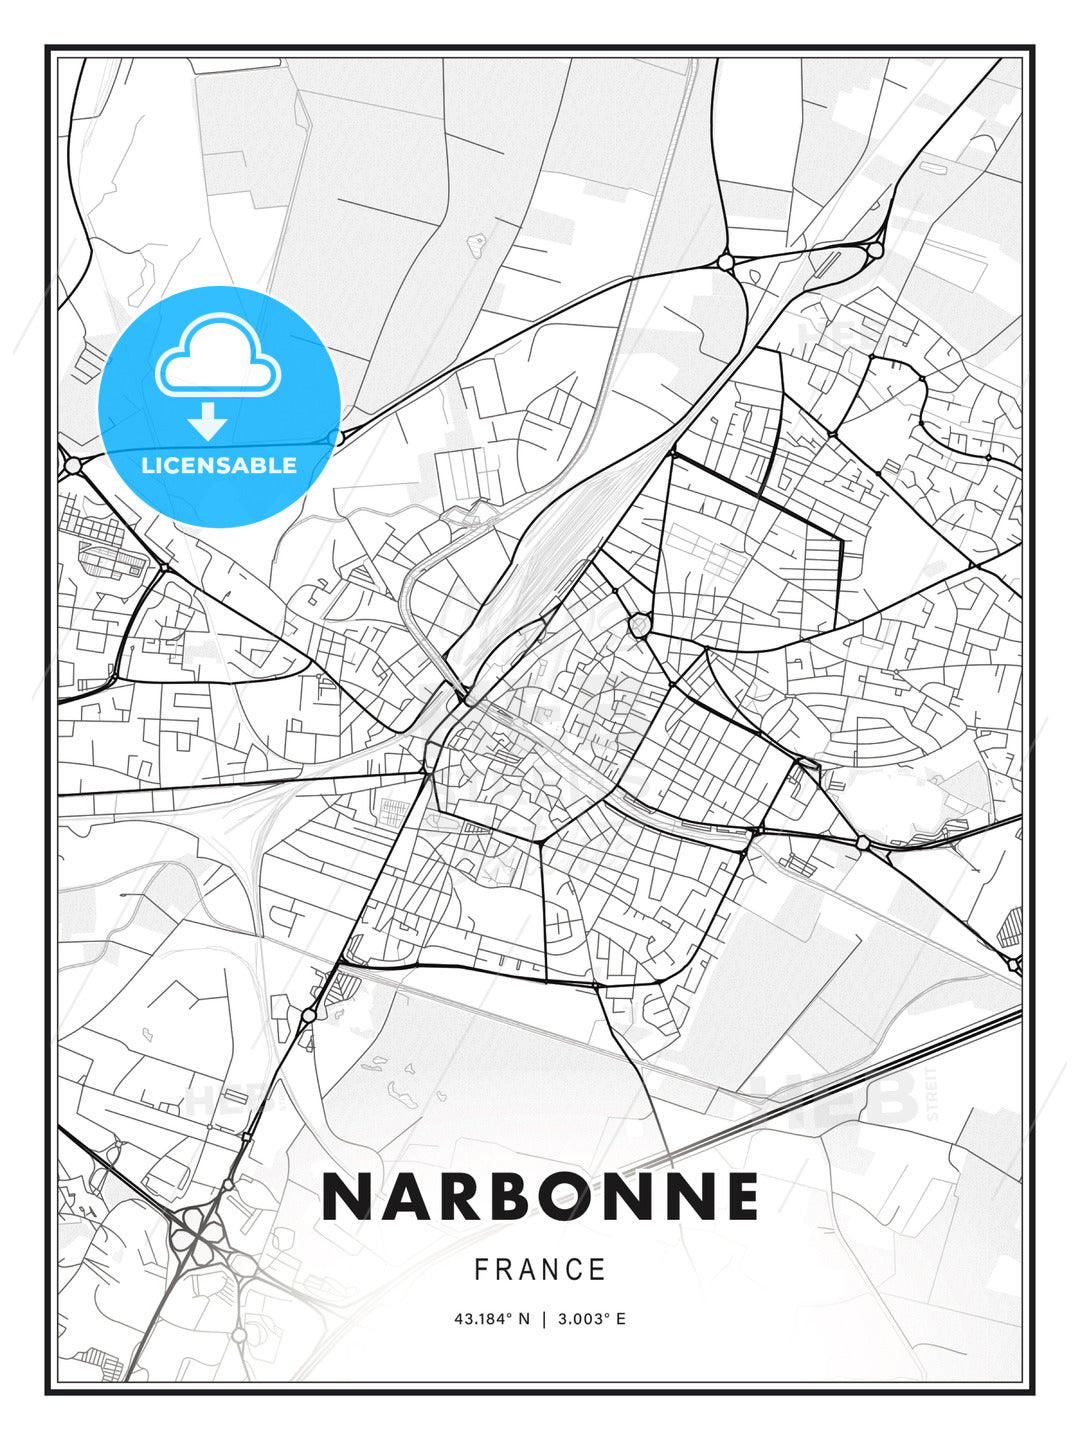 Narbonne, France, Modern Print Template in Various Formats - HEBSTREITS Sketches